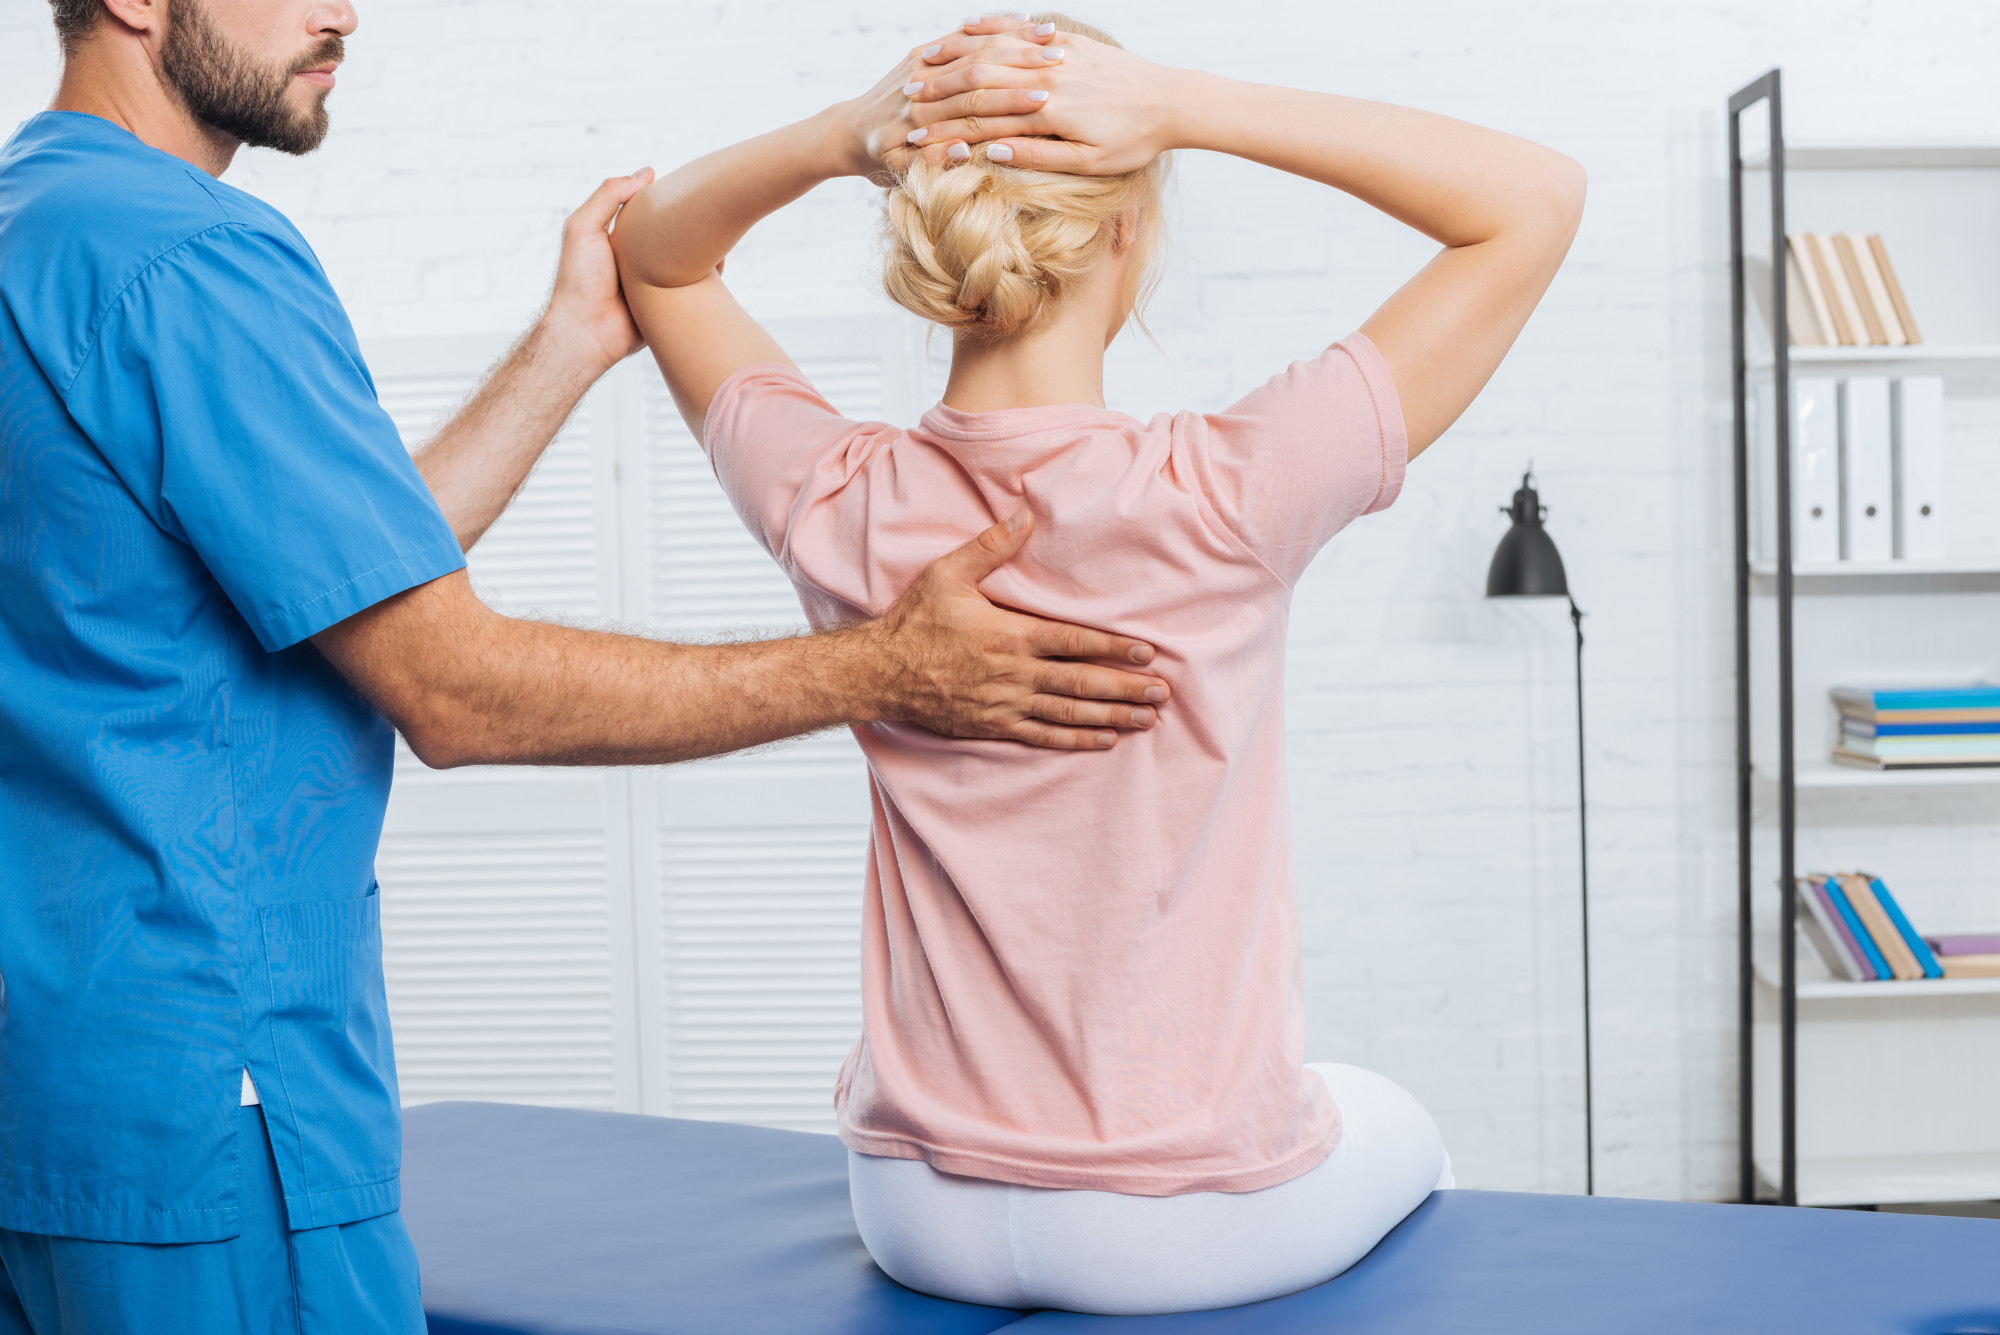 Best Chiropractor for Back Pain